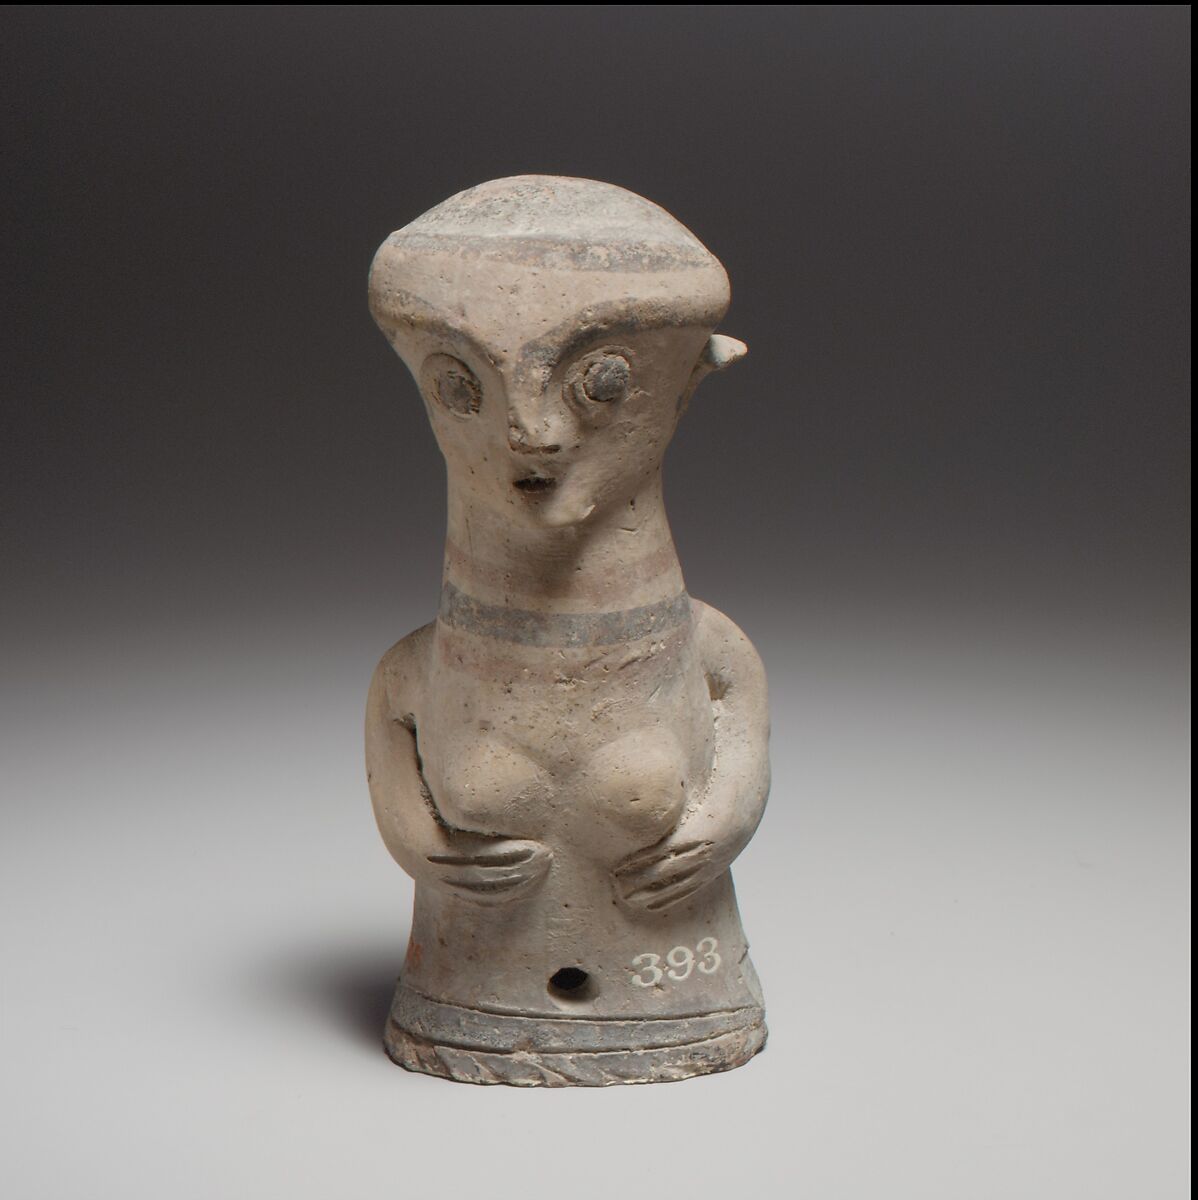 Terracotta statuette of the upper part of a woman, Terracotta, Cypriot 